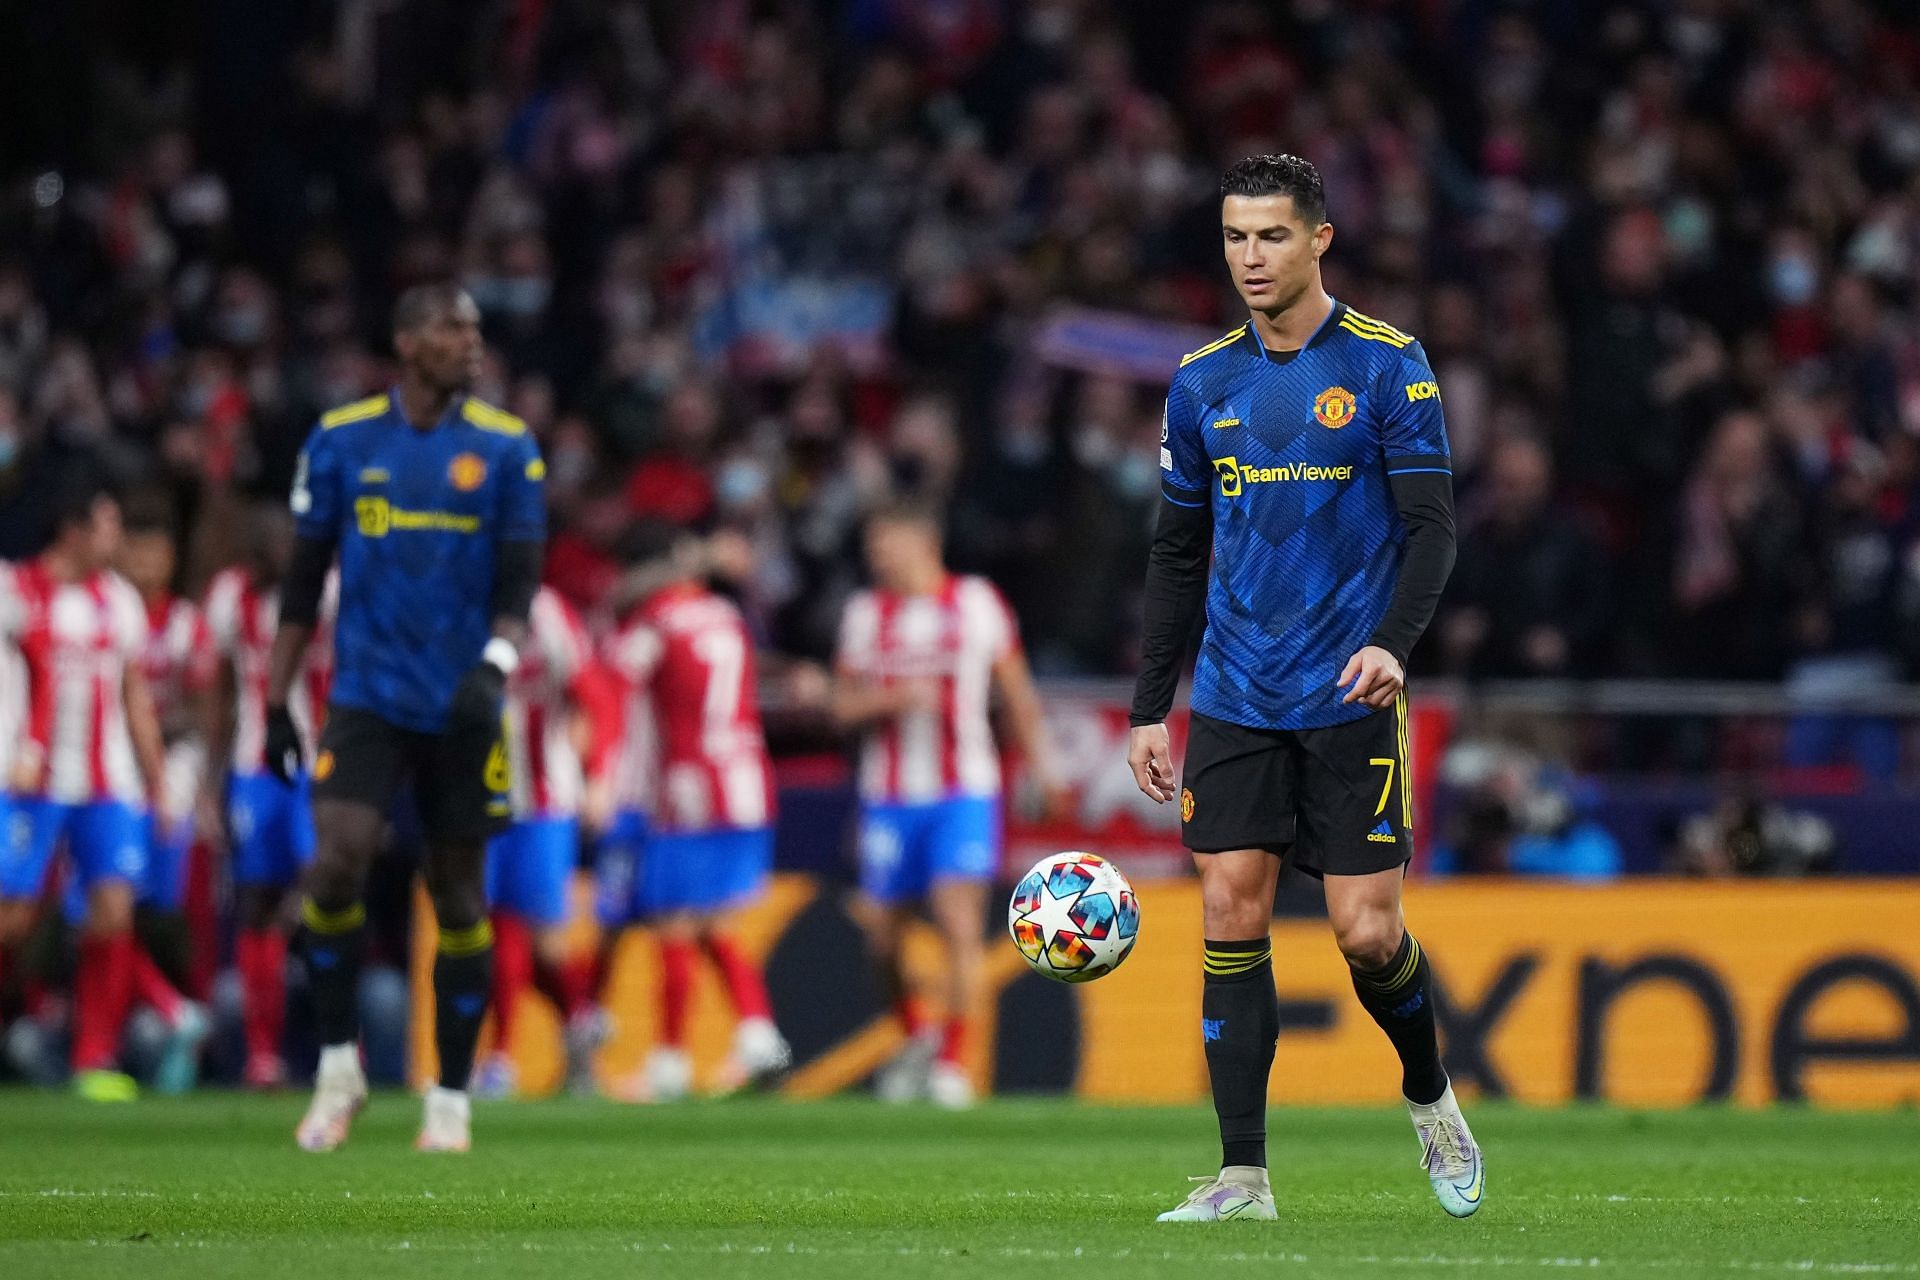 Manchester United&#039;s Cristiano Ronaldo was dealt with quiet easily by the Atletico Madrid defense.